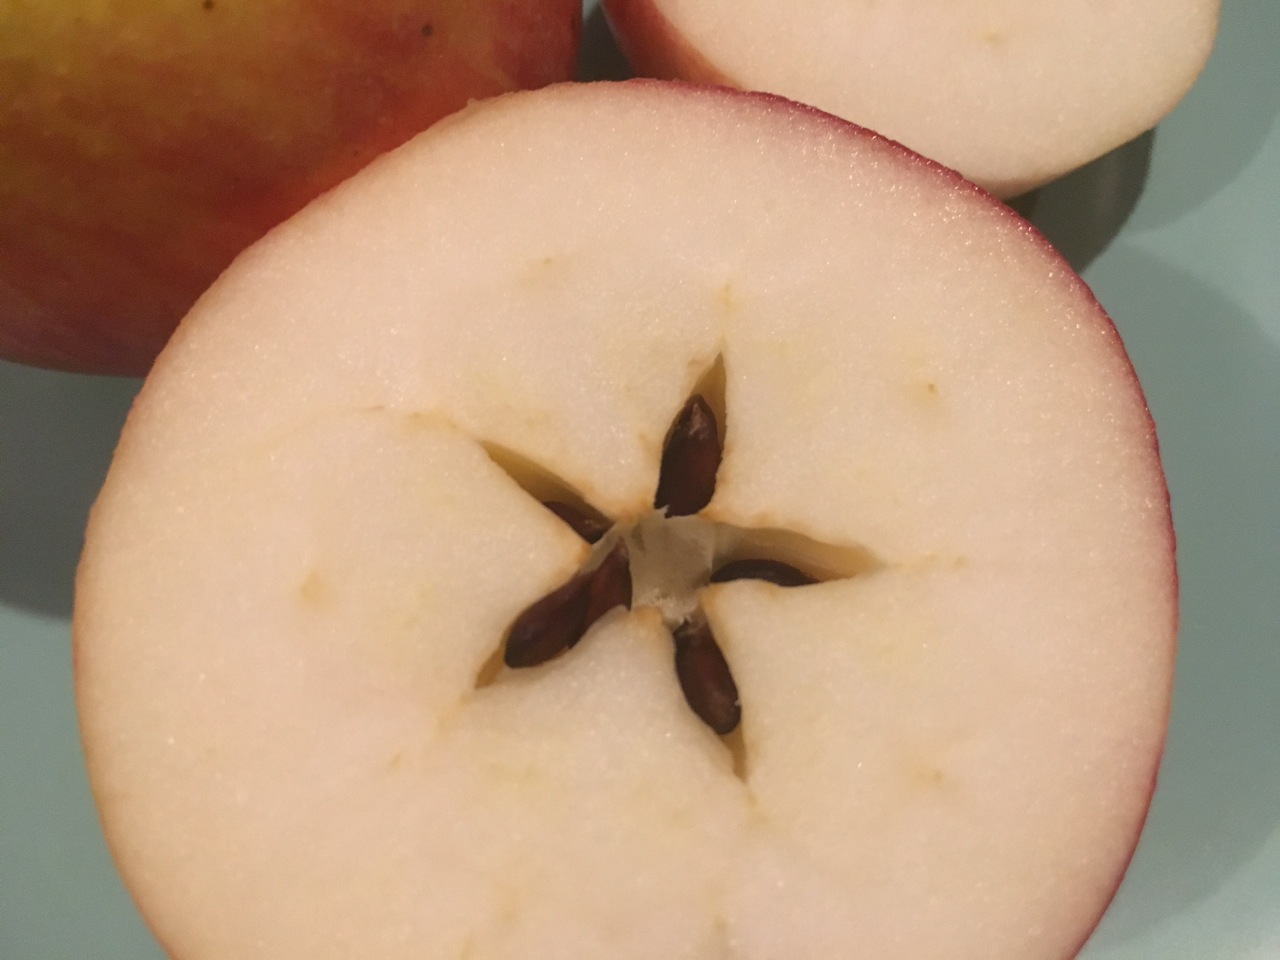 Can I grow apples from seeds?